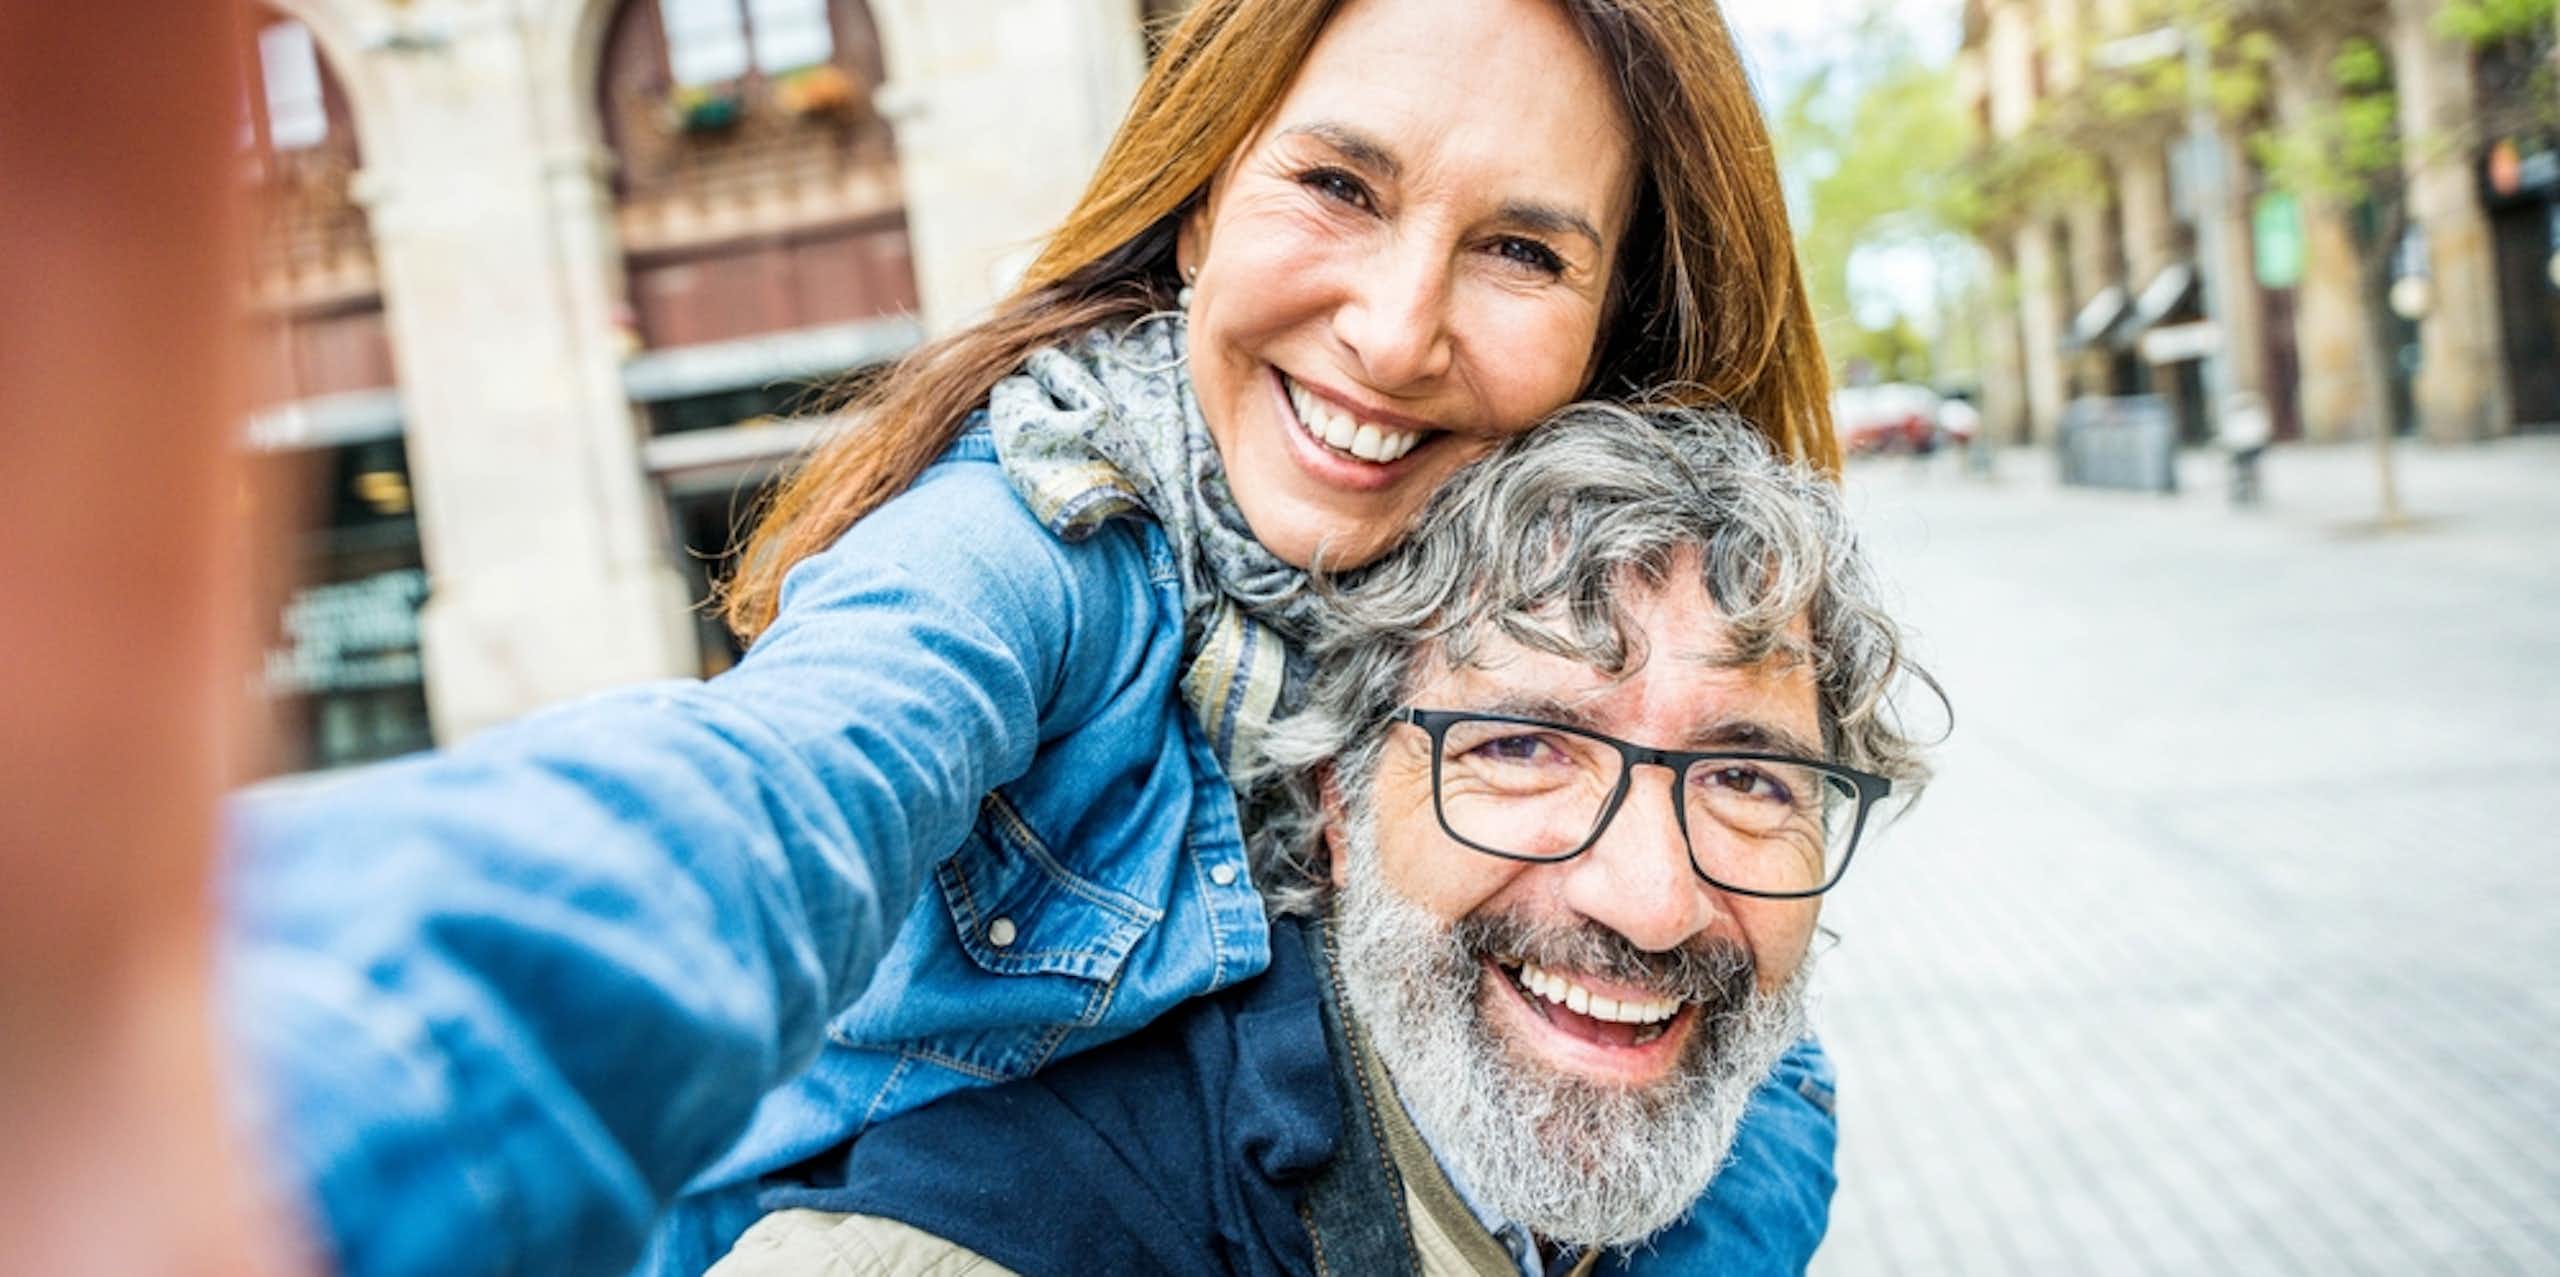 Older happy couple, woman on man's back, taking a selfie in a piazza or town square